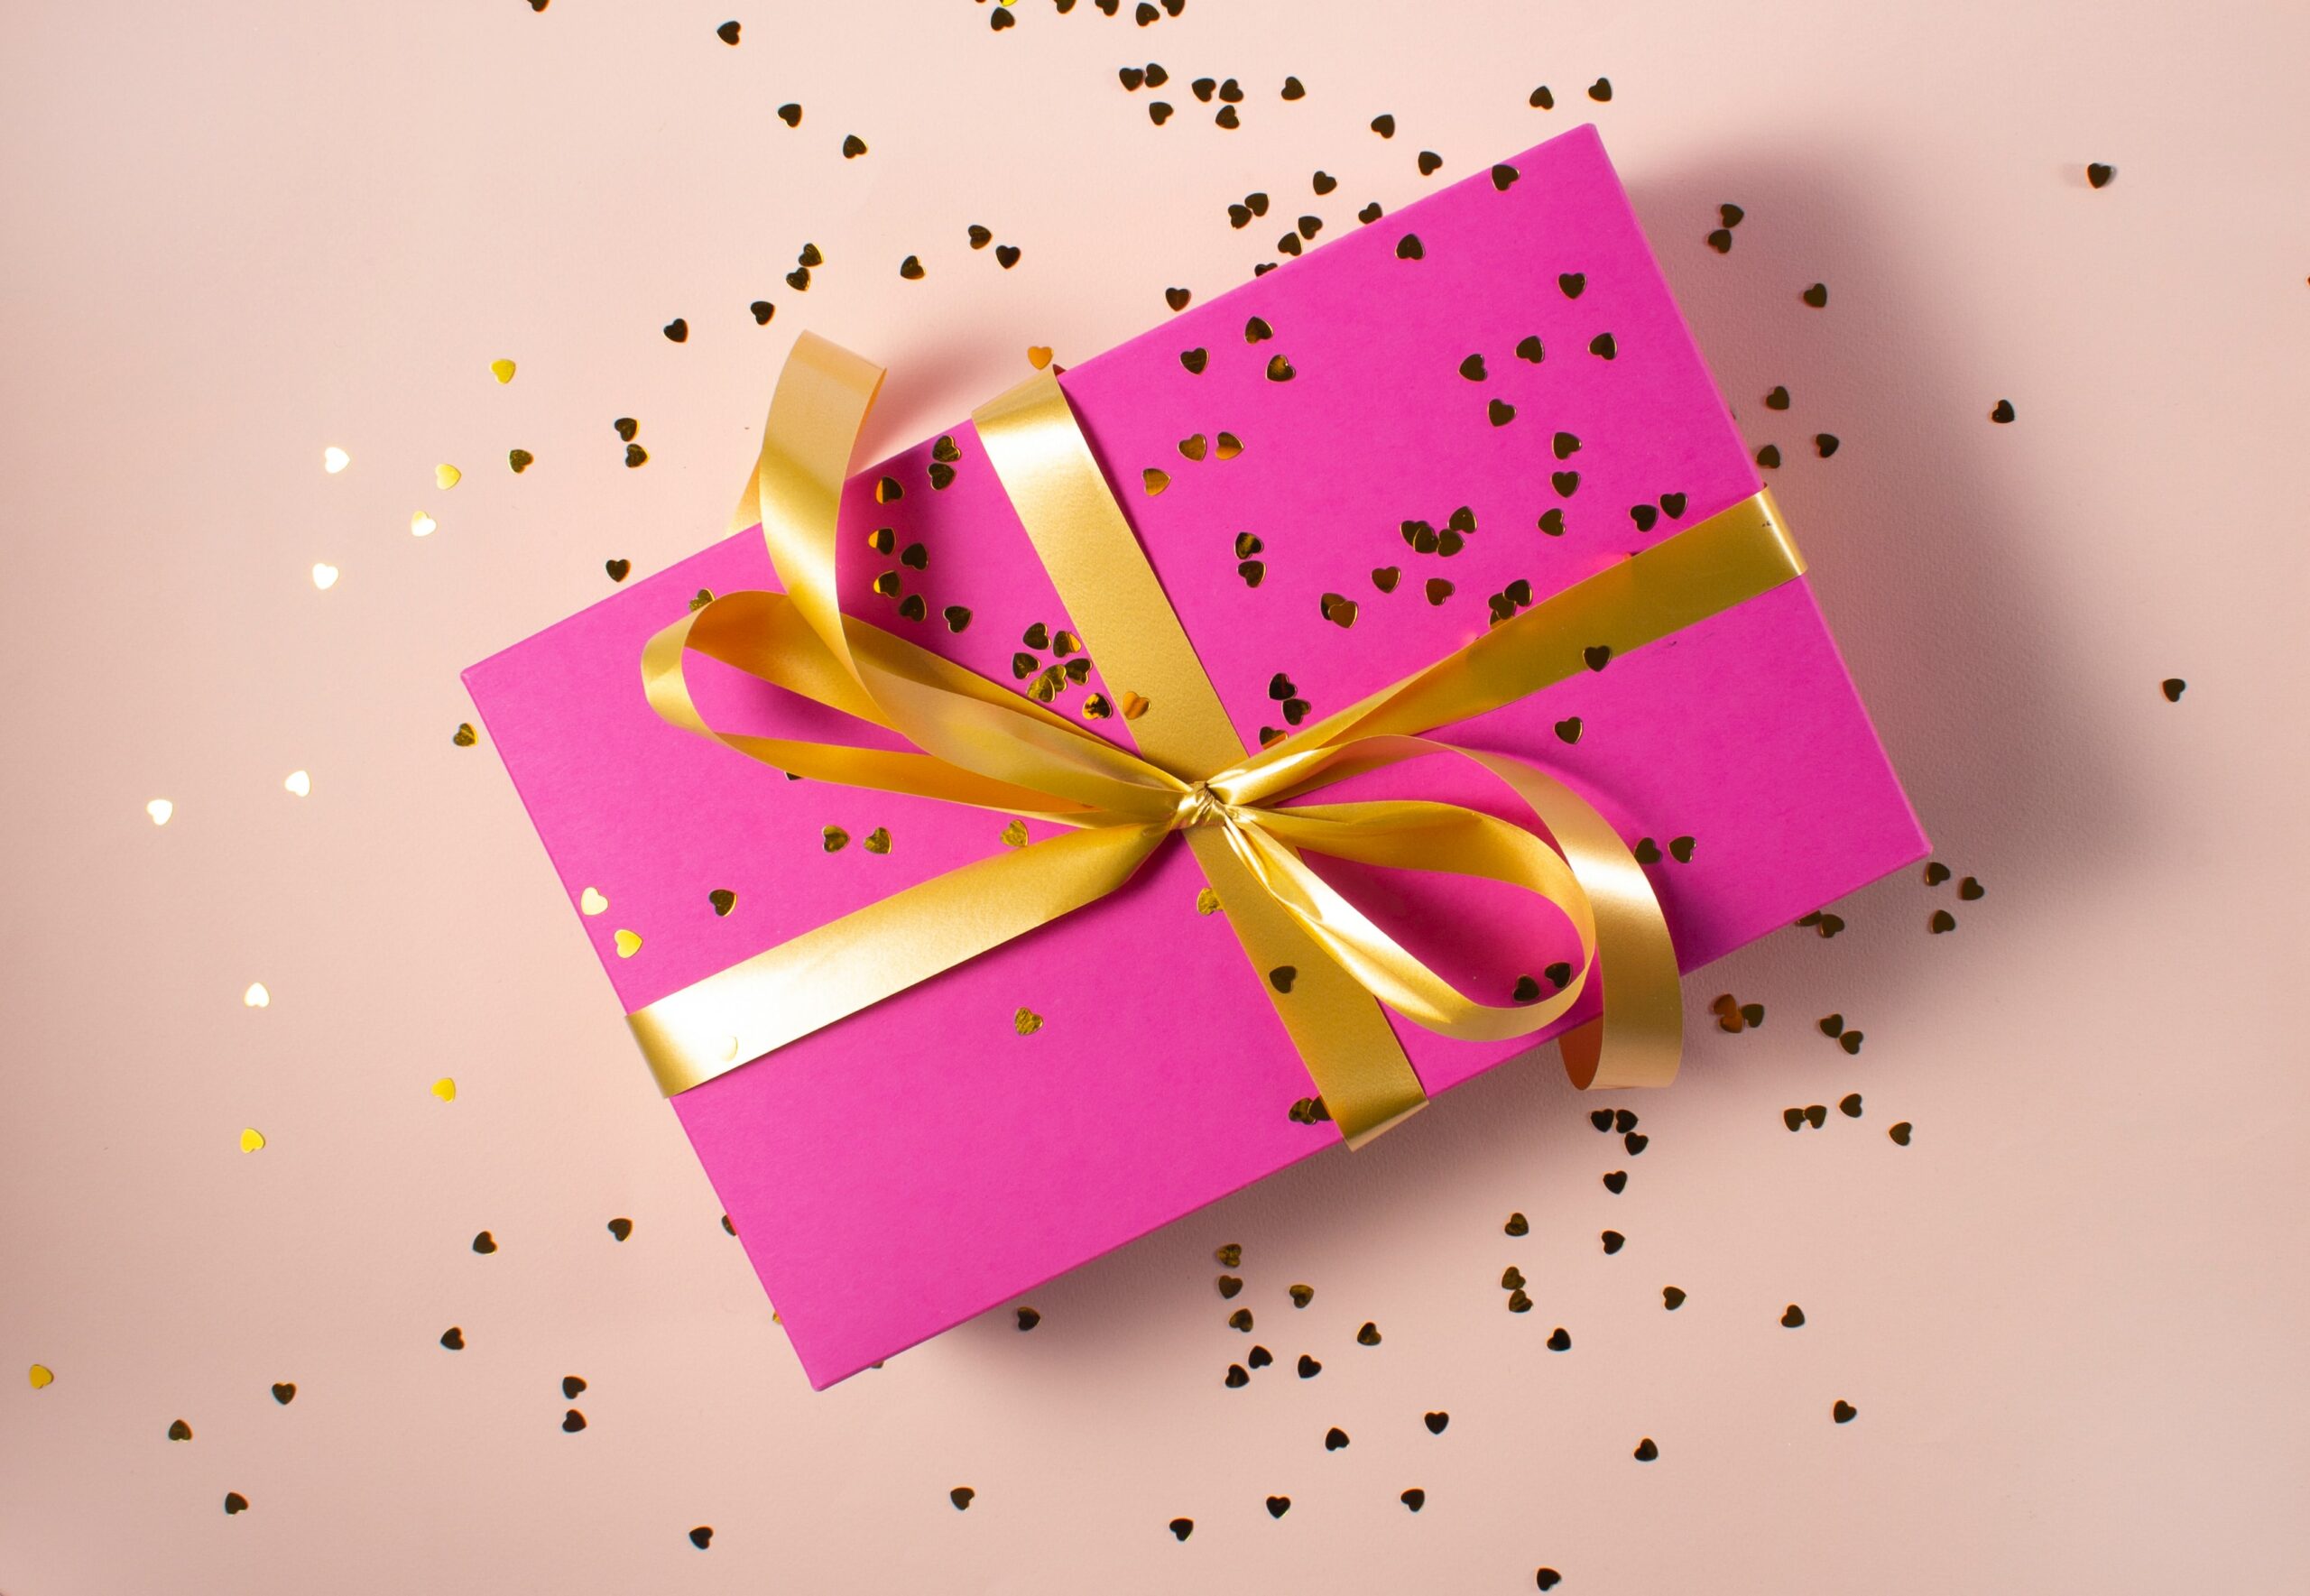 How to Create a Gift Campaign and Tips You Need to Know to Make It Successful